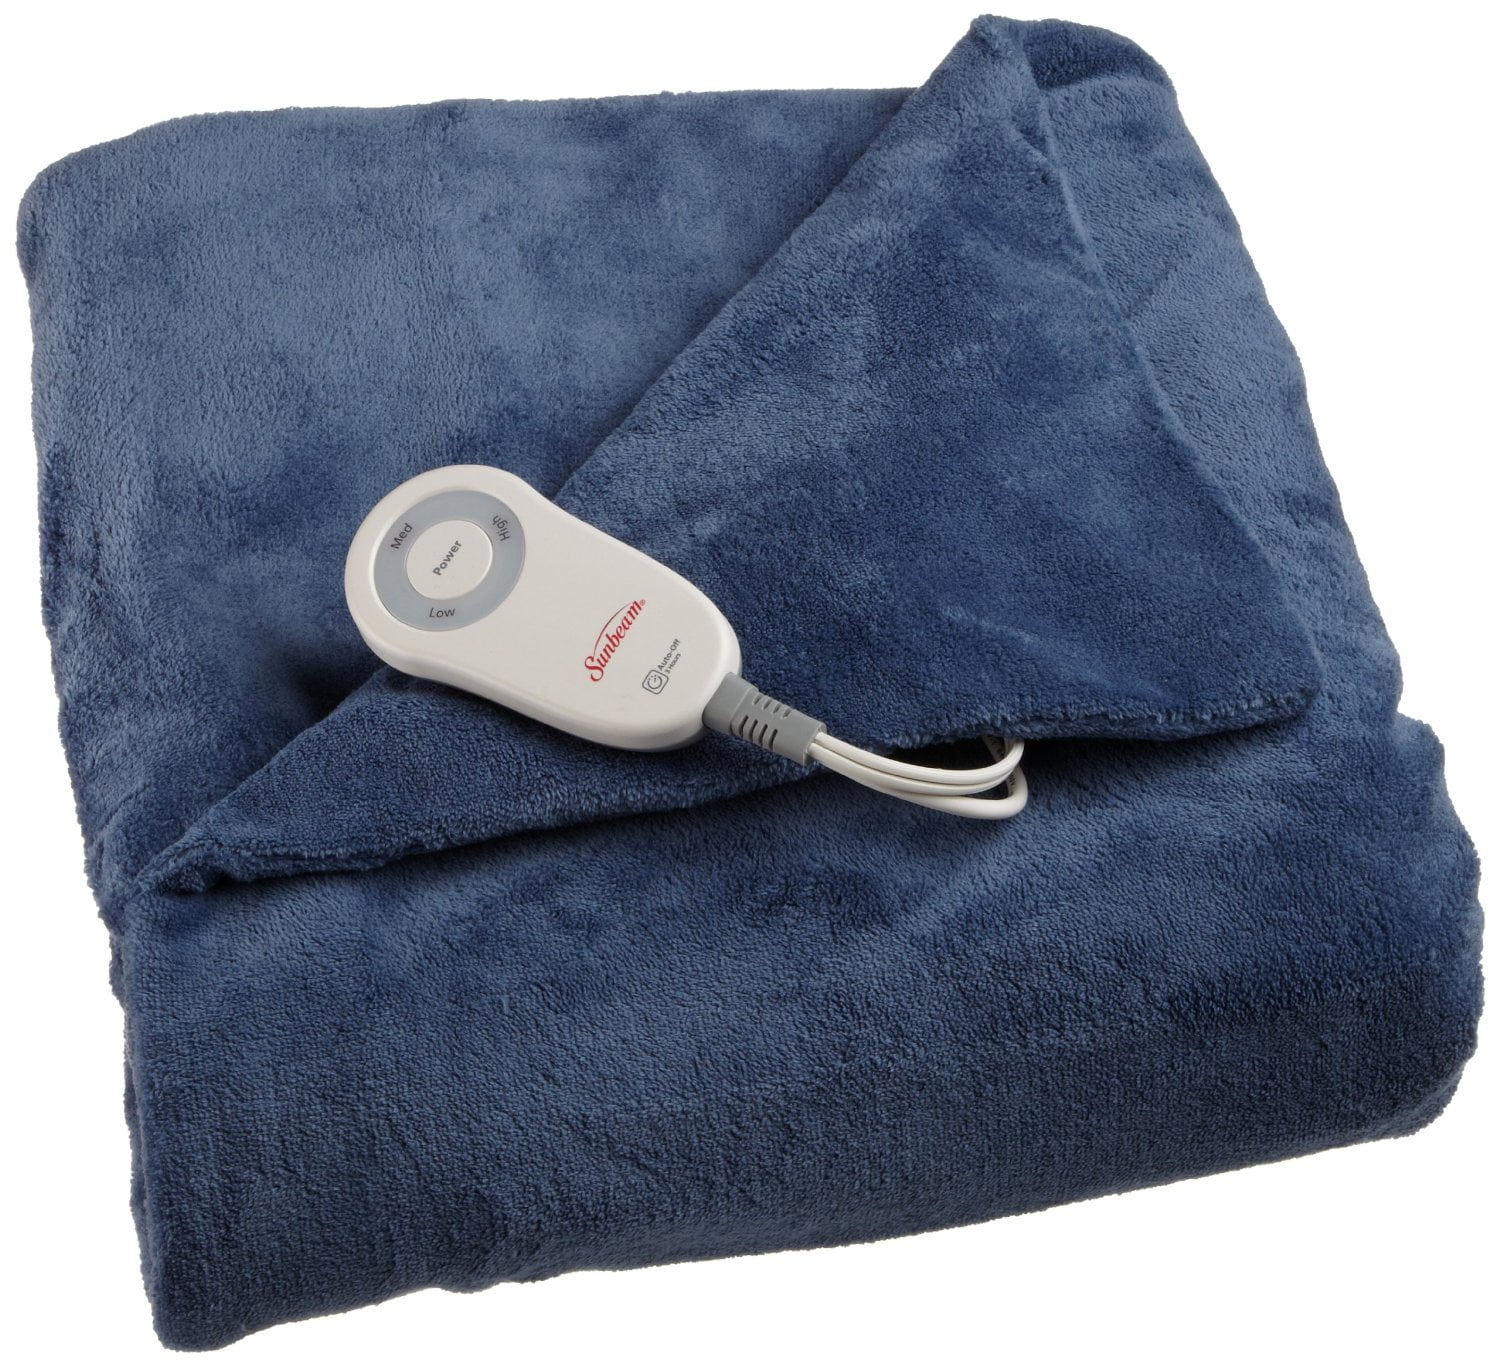 Charcoal Black Sunbeam Electric Heated Throw Blanket Velvet Plush Washable with 3-Heat Setting Auto-Off Controller 